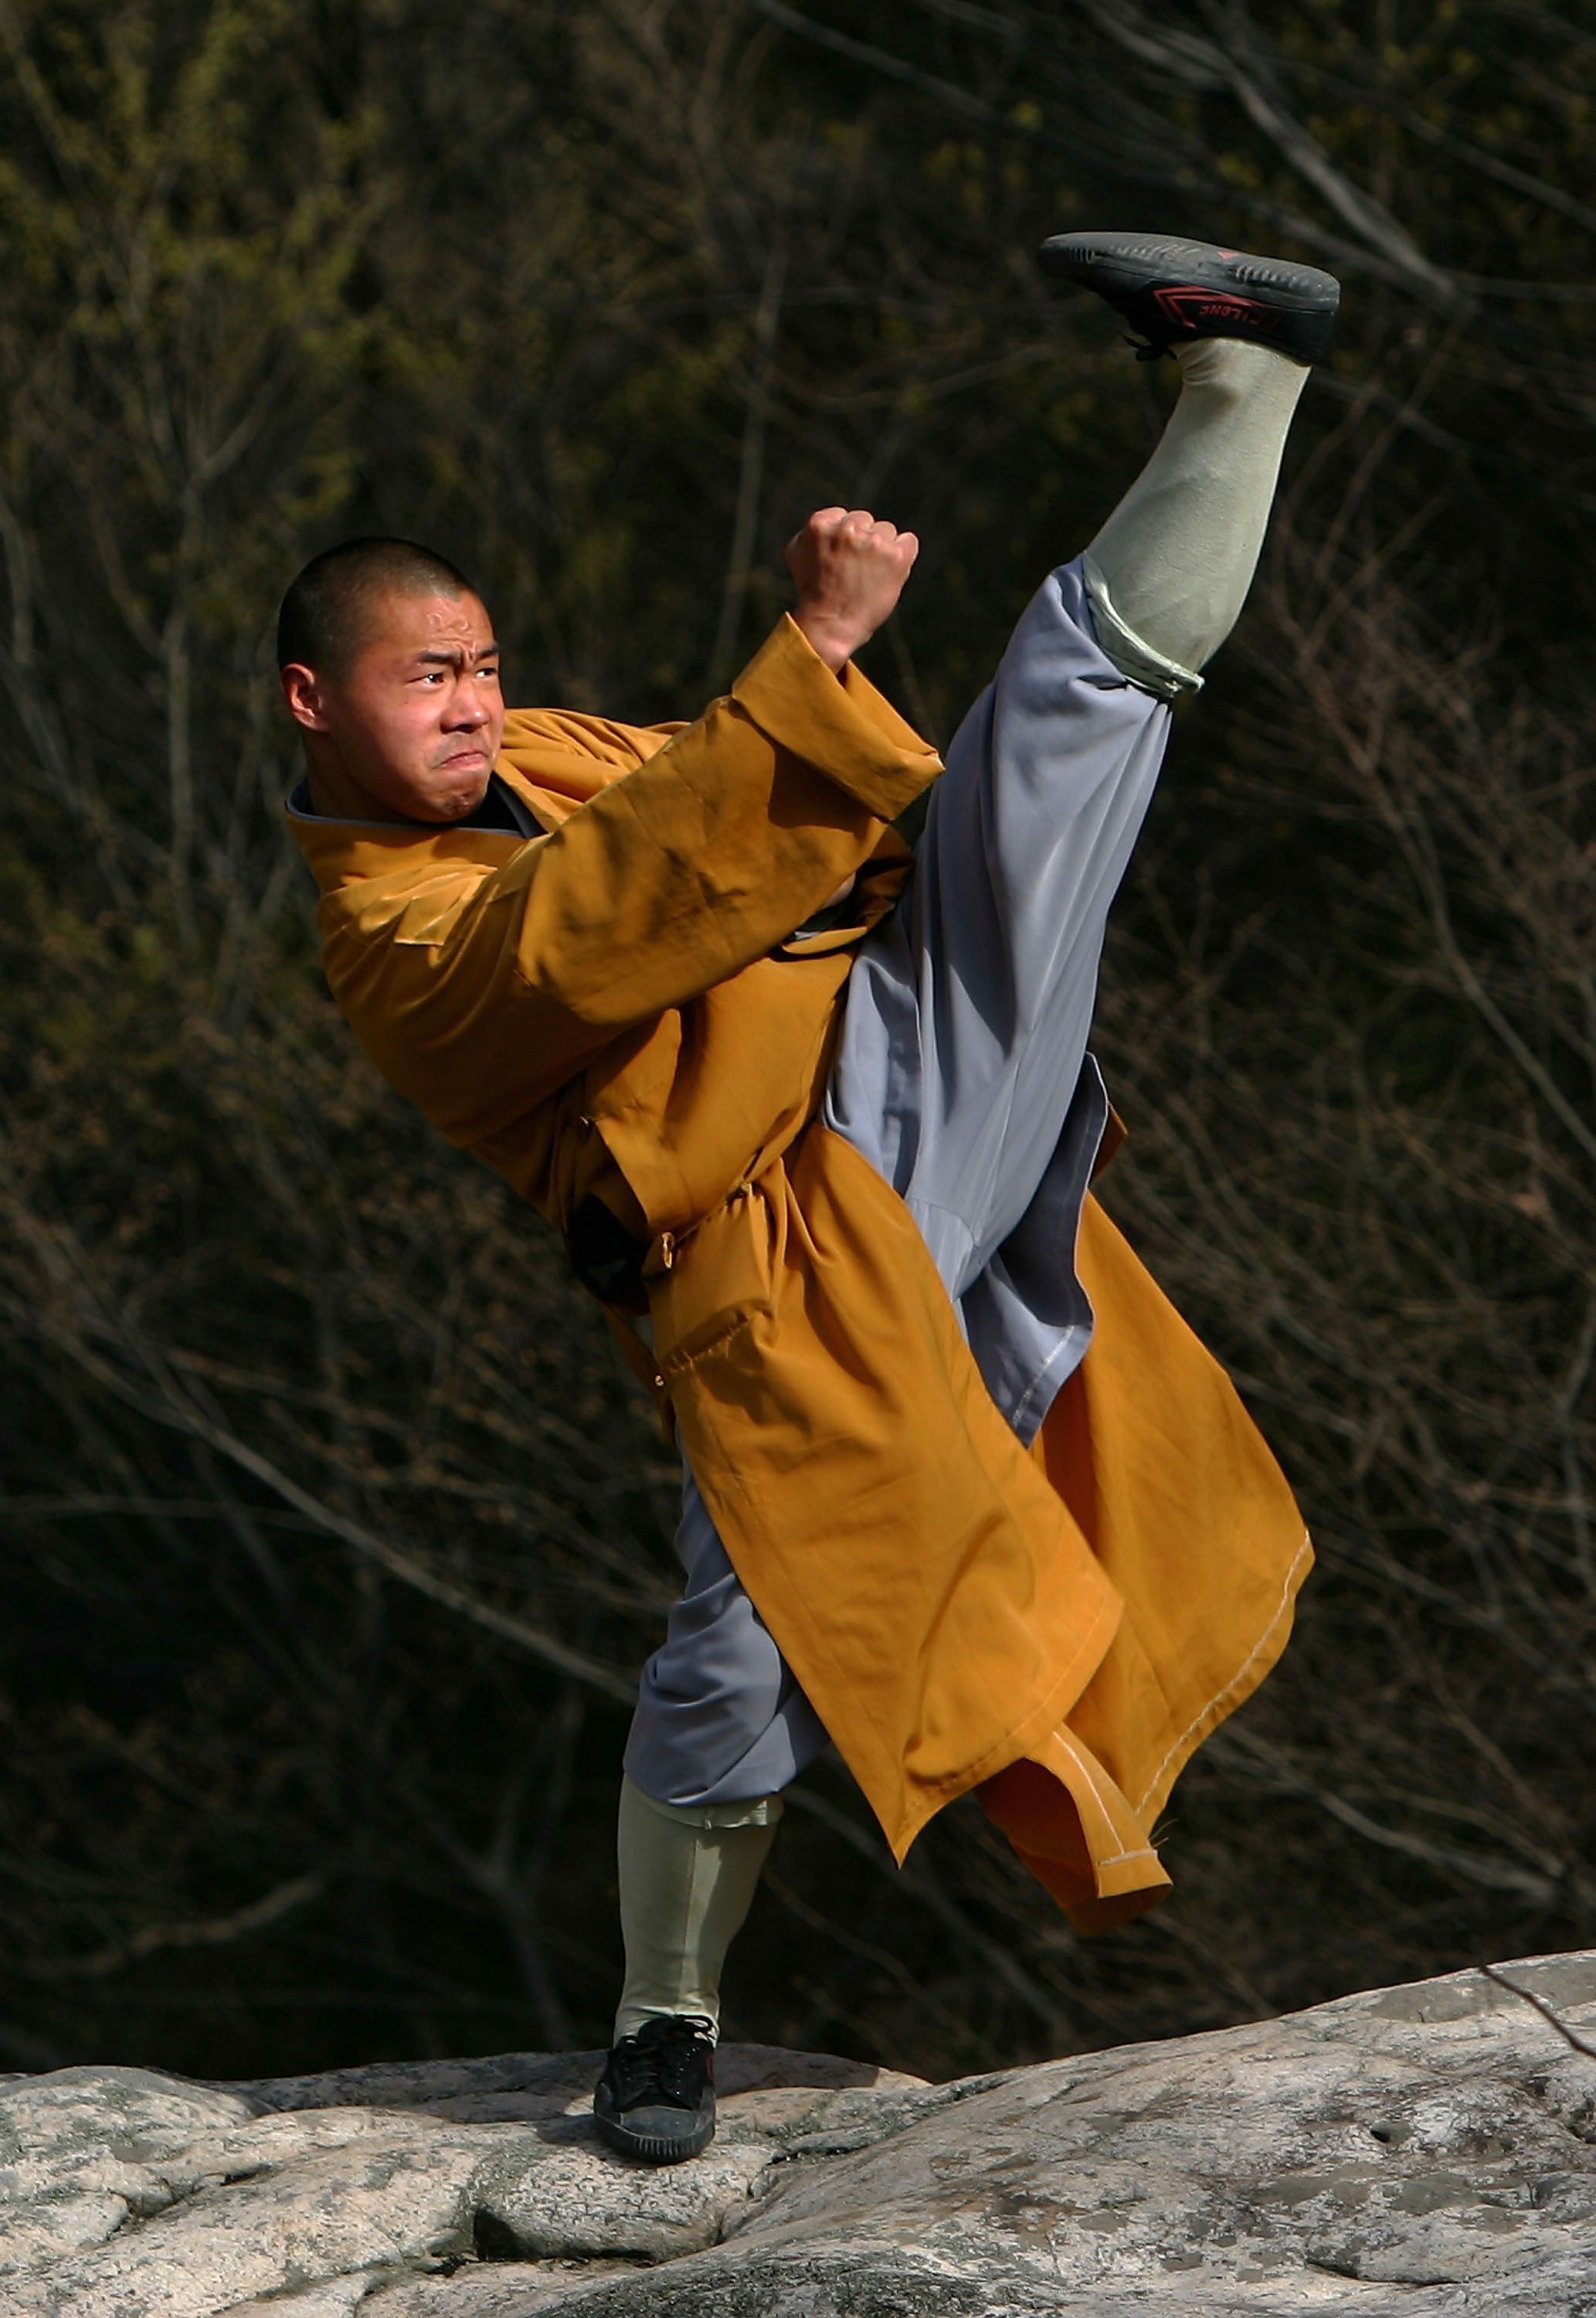 Shaolin kung fu wallpapers background beautiful best available for download shaolin kung fu photos free on images